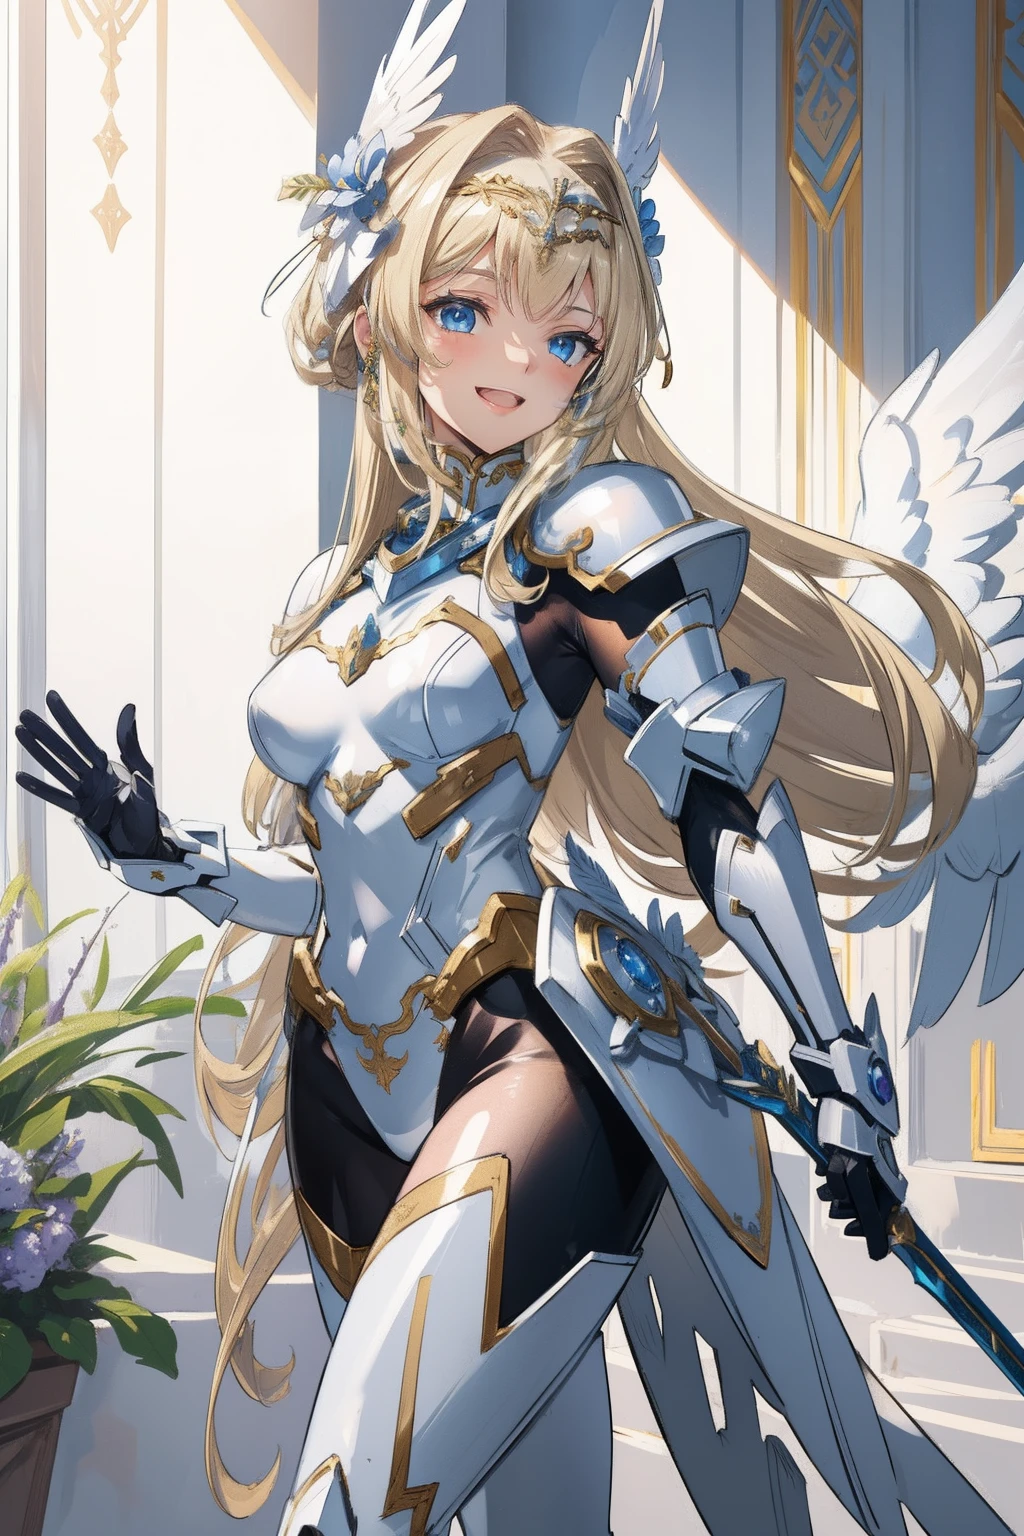 (​master piece, Best Quality),  Intricate details, valkyrie, kawaii, Happy, (((Laugh))), Villainous smile, Hand up, Looking at Viewer, Feather Headgear, Flower meadow, 
1 girl in, Solo, Portrait, Tentacle Plutinum Blonde Hair, drooping iceblue eyes, Silver Single Thigh, White Independent Single Sleeve, gloves, Single braid, 
 mecha musume, White bodysuit, Silver Reinforced Suit, Mini Feather Wings, silver pantyhose, full armor, flower decoration, equip sword,